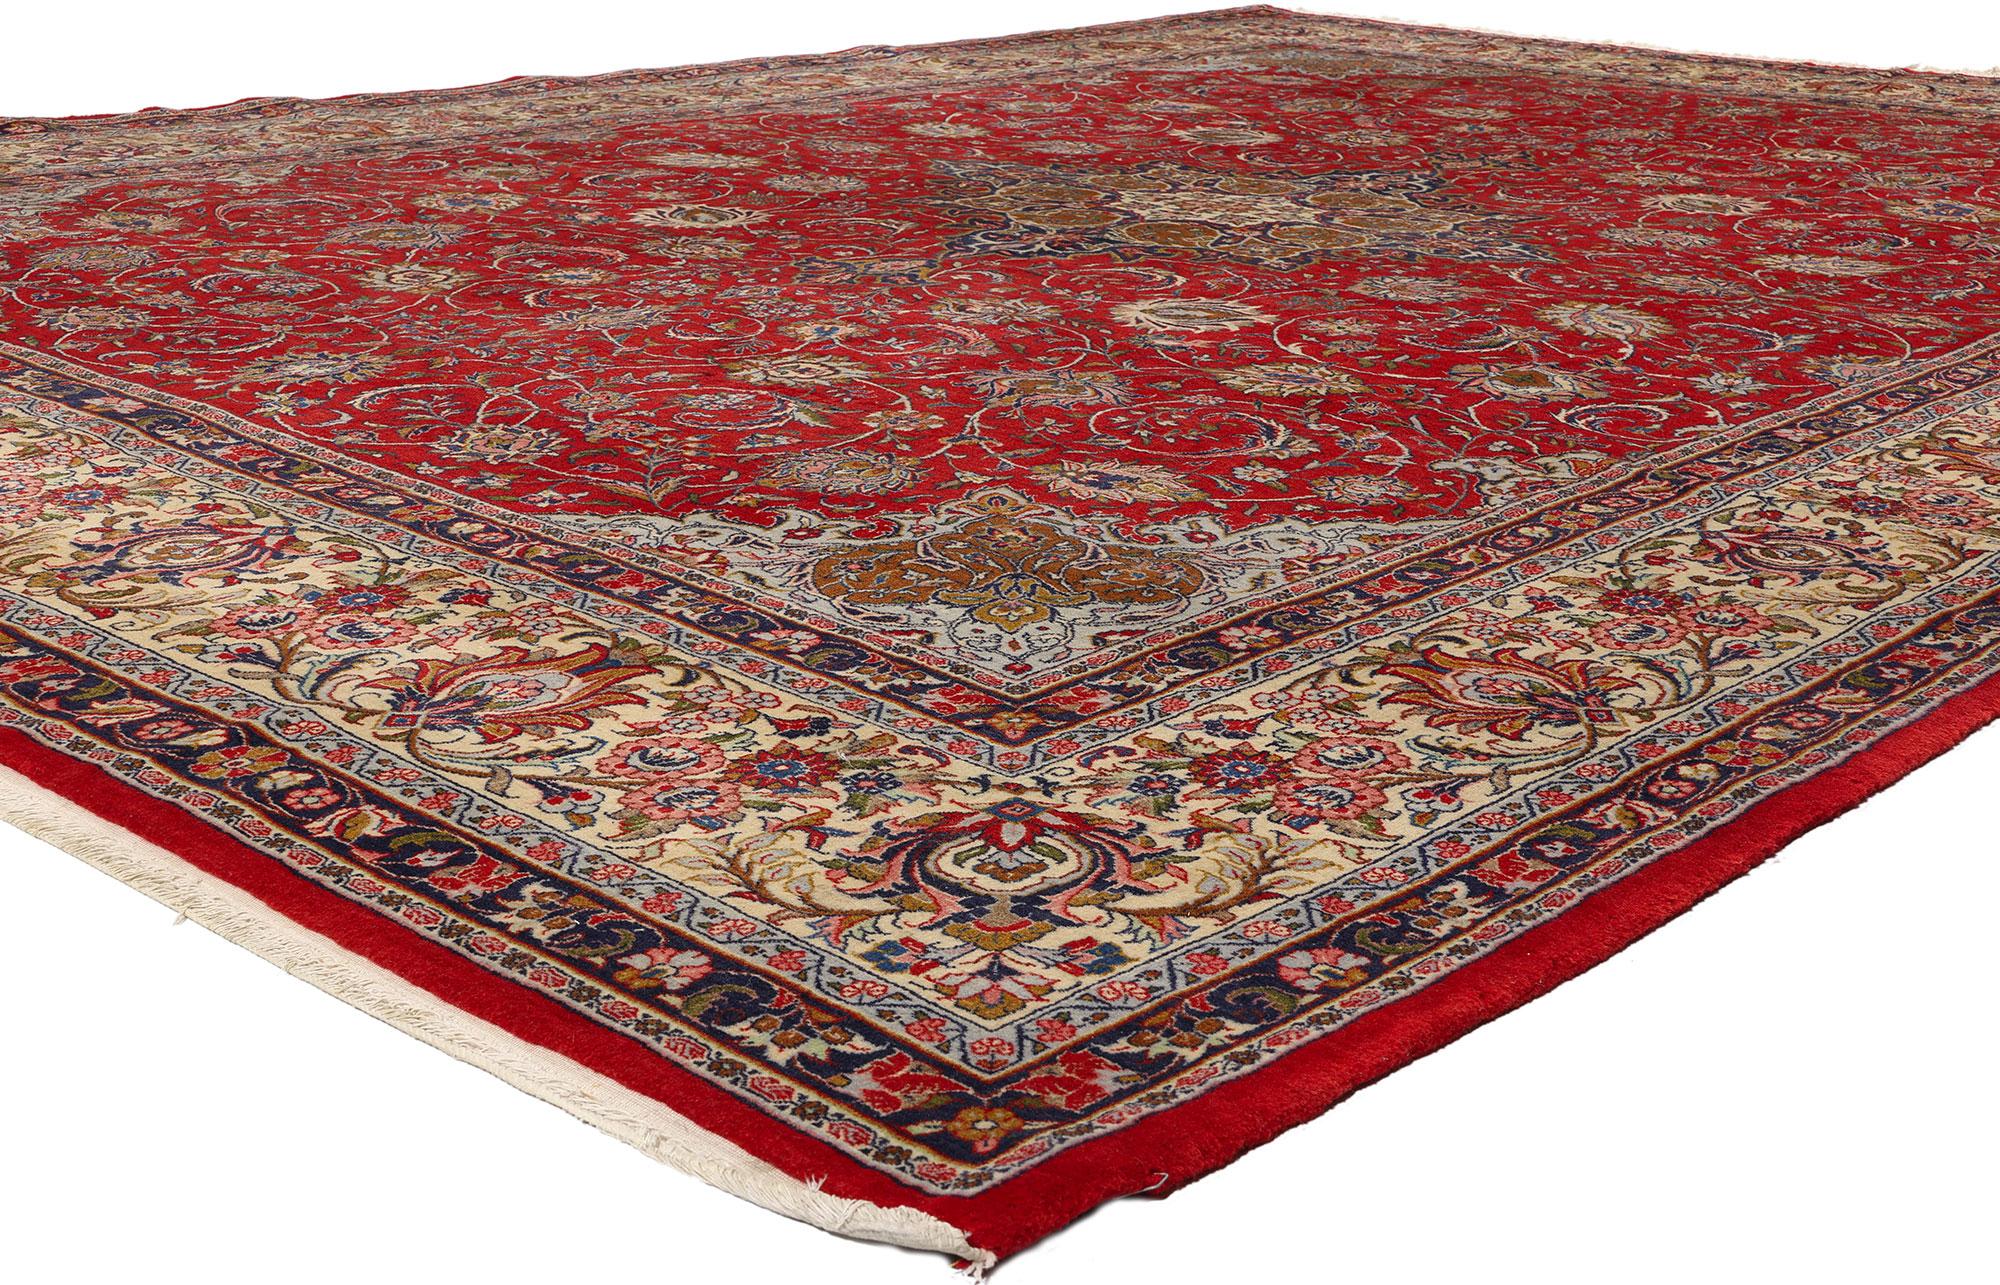 78700 Vintage Red Persian Kashan Rug, 09'09 x 13'01. Persian Kashan rugs are intricately designed handcrafted rugs originating from Kashan, Iran, renowned for their elaborate patterns, fine craftsmanship, and rich history. Typically featuring a